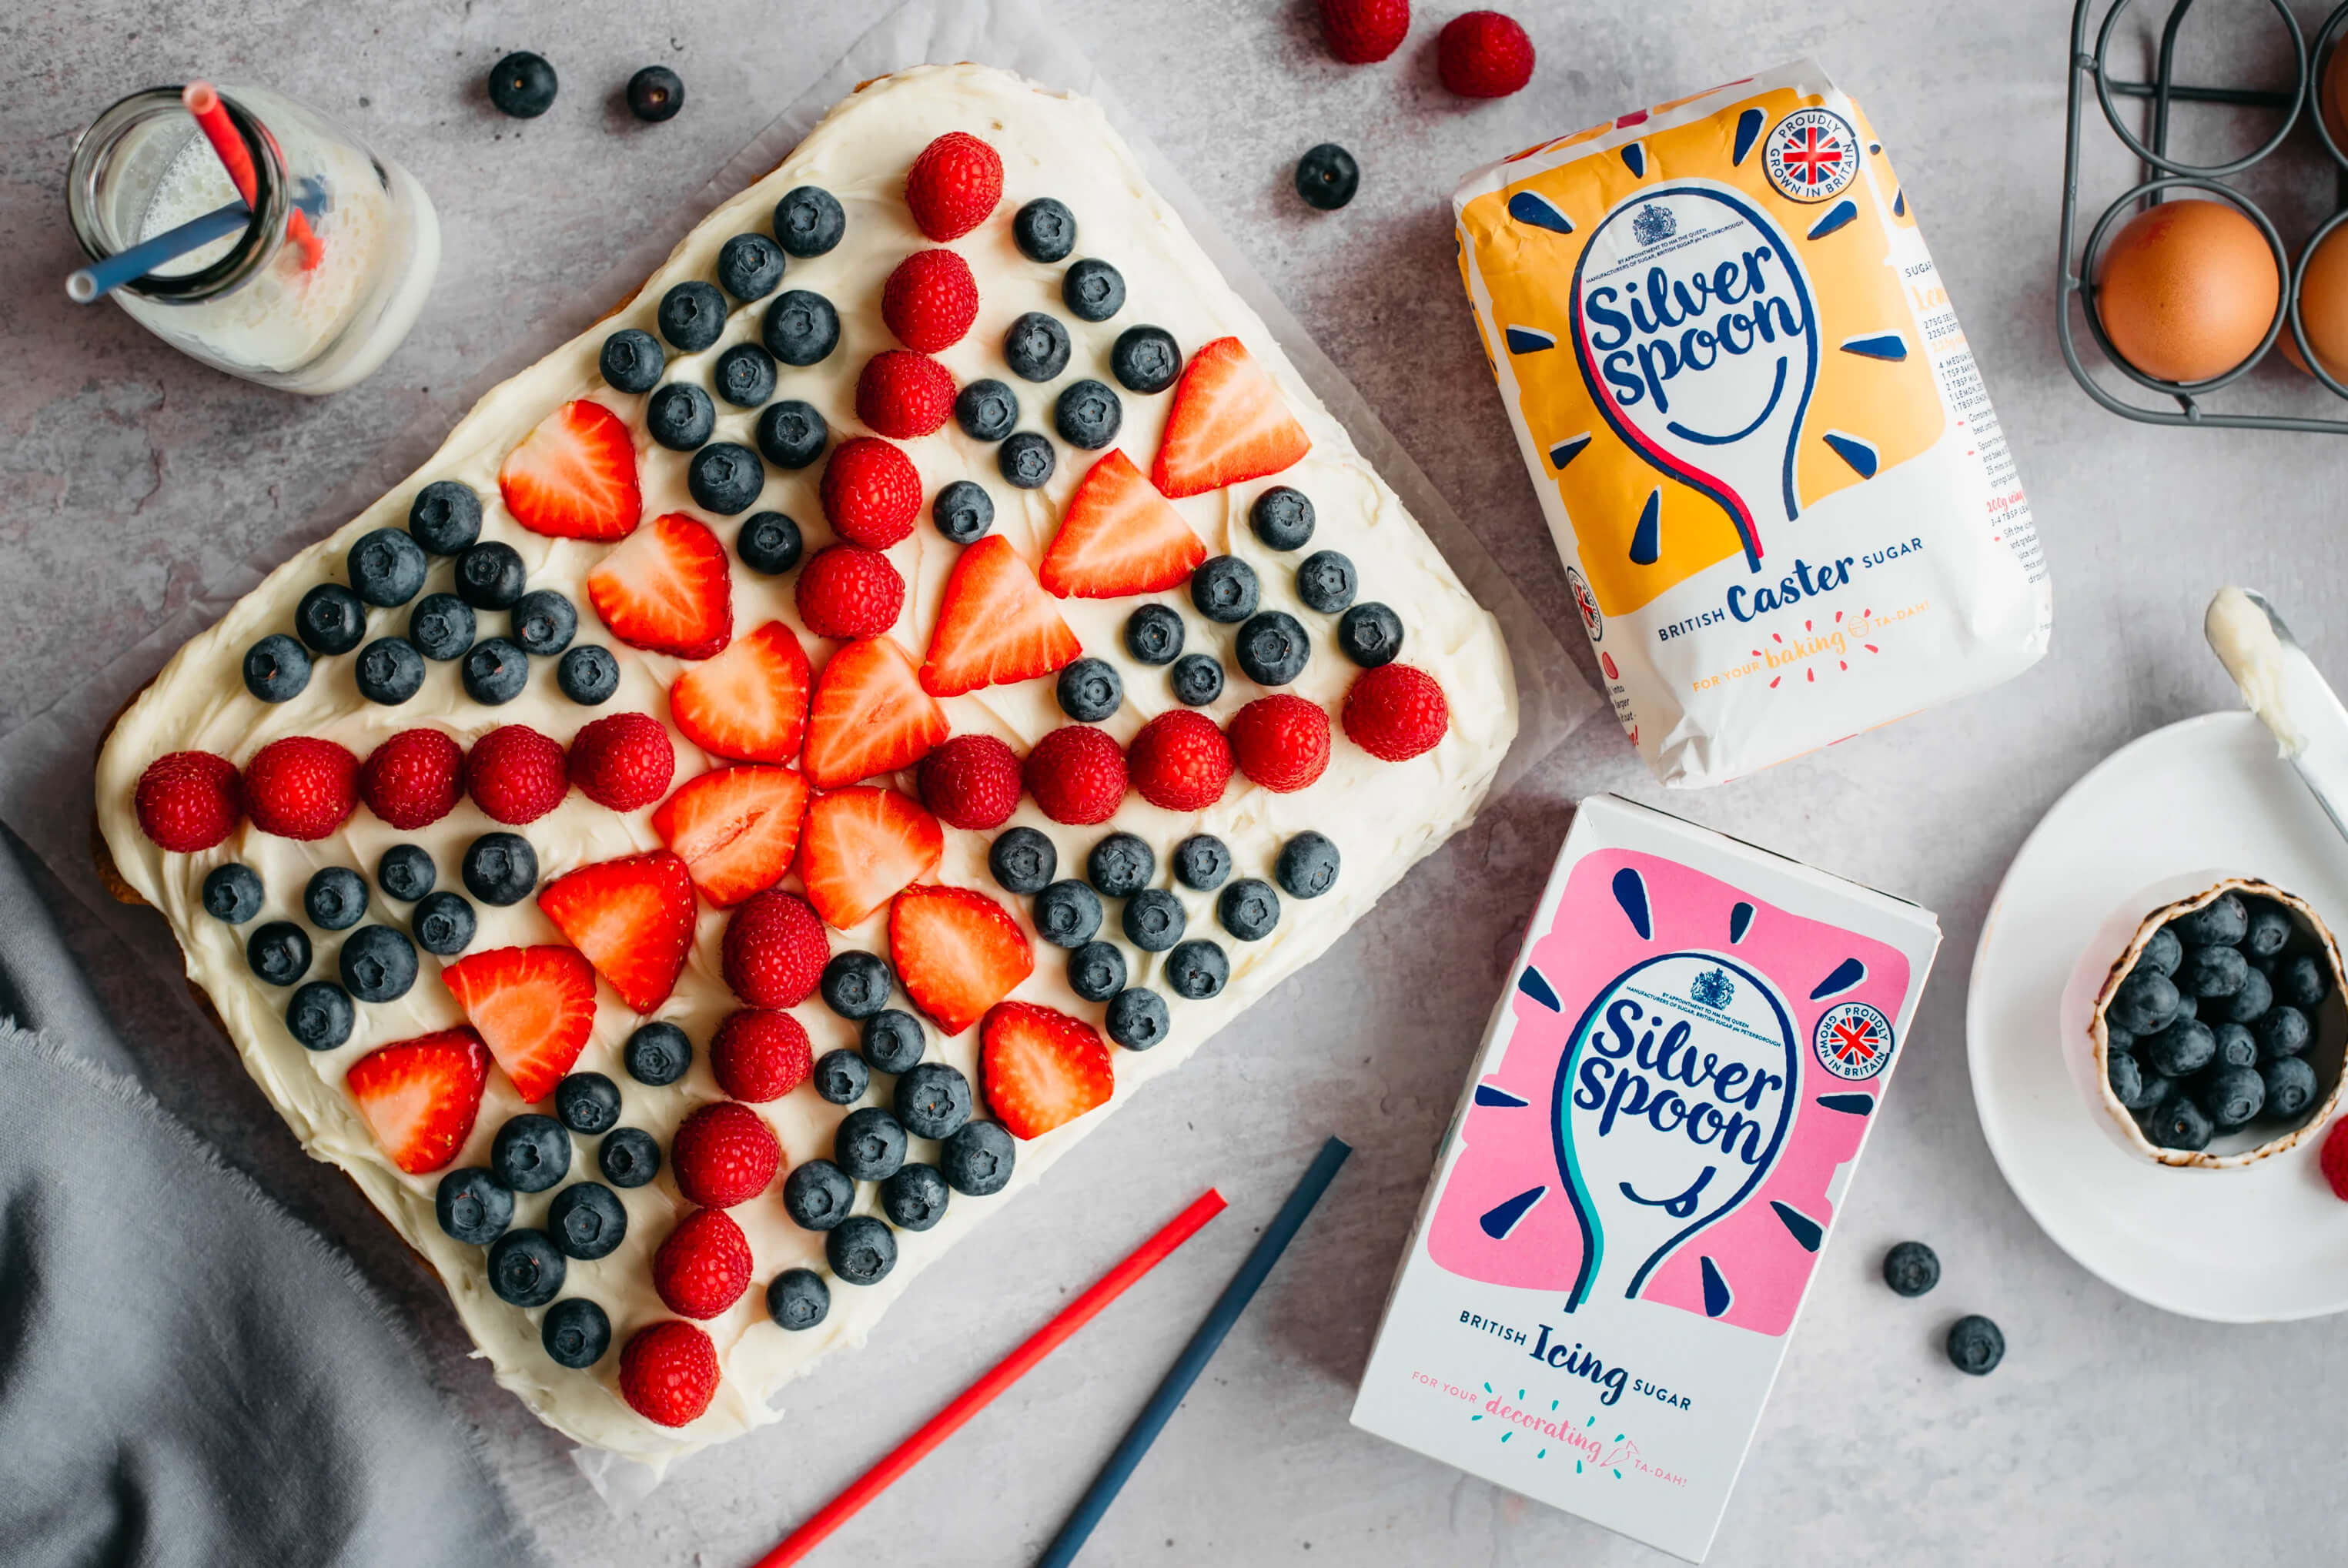 A large tray bake cake, with buttercream topping covered in berries in the style of a Union Jack, alongside packets of Silver Spoon Caster Sugar and Silver Spoon Icing Sugar.